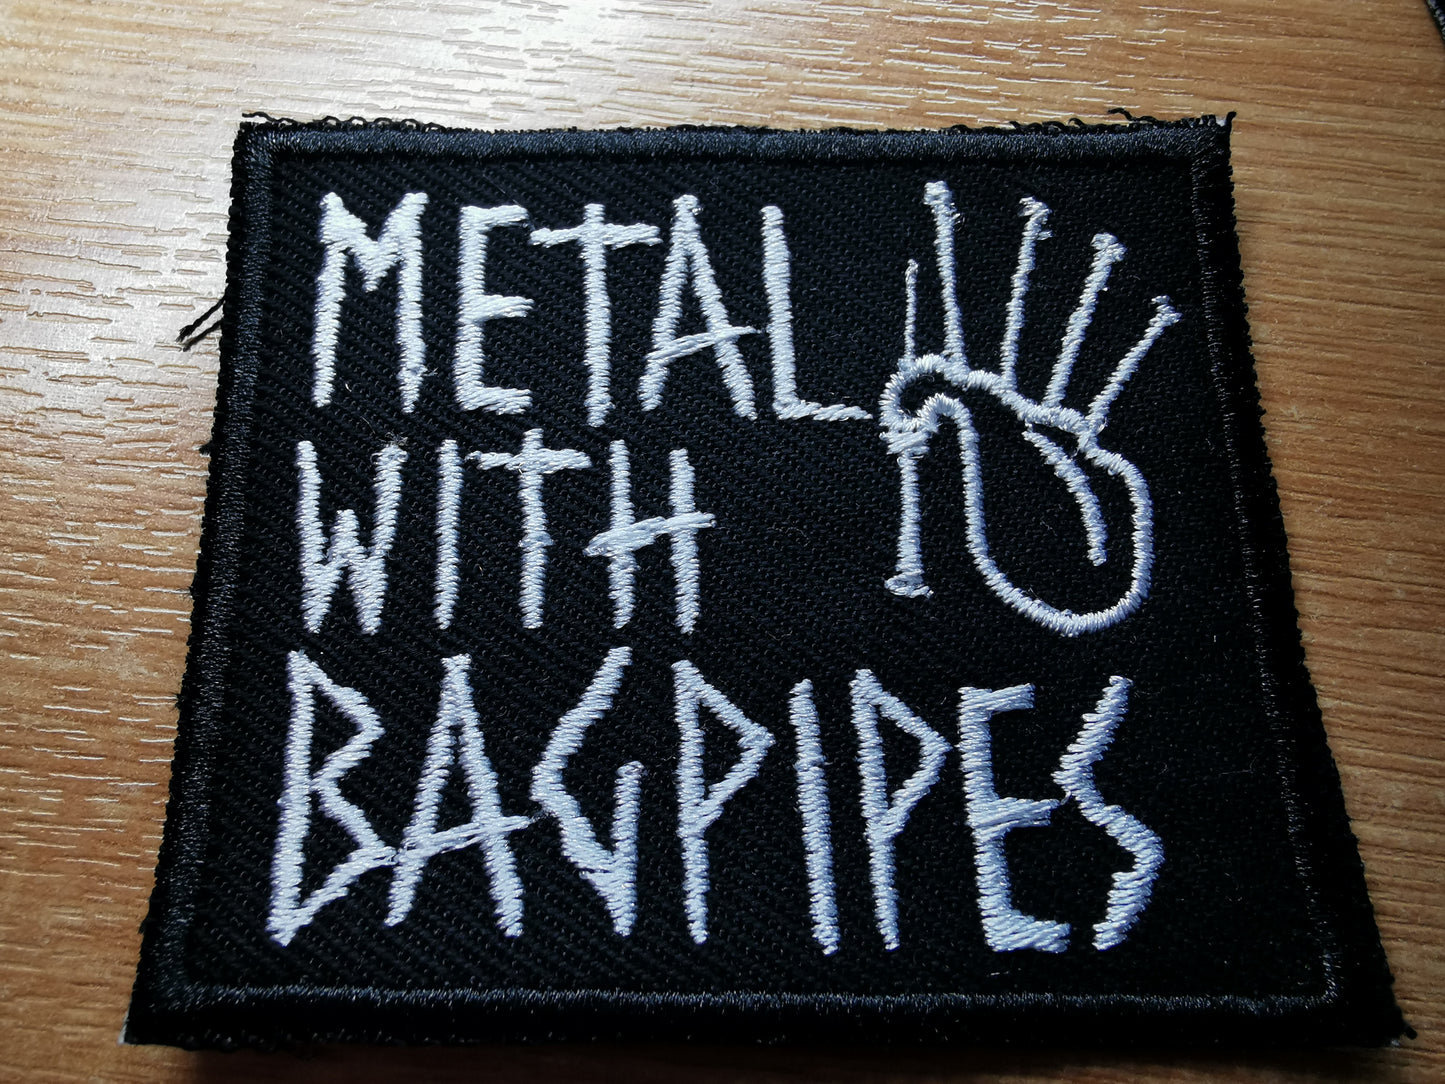 Metal With Bagpipes Embroidered Patch Saor Celtic Eluveitie Skiltron Alestorm